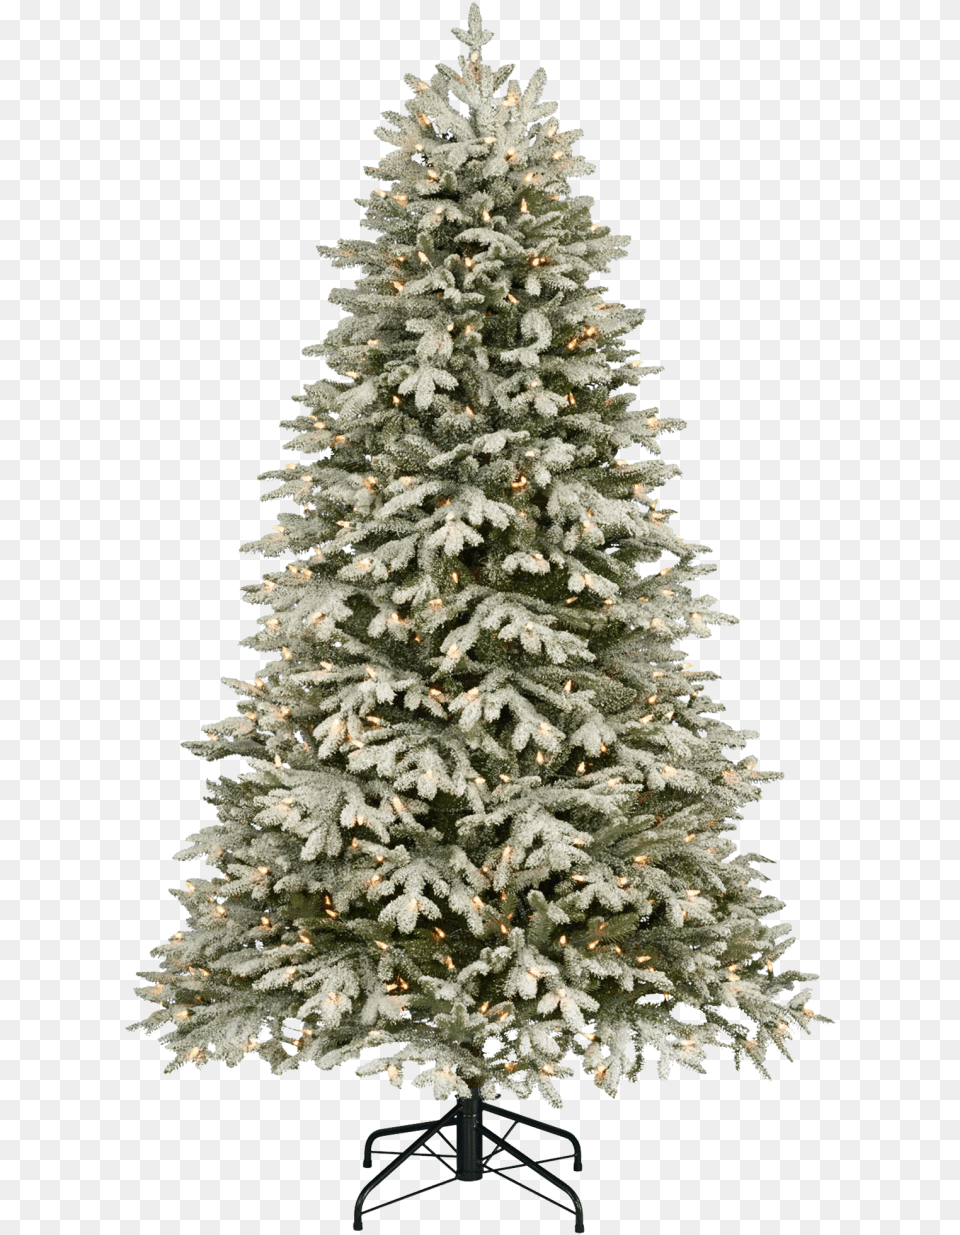 Traditional Christmas Tree With Snow Image Frosted Christmas Tree, Plant, Pine, Christmas Decorations, Festival Png